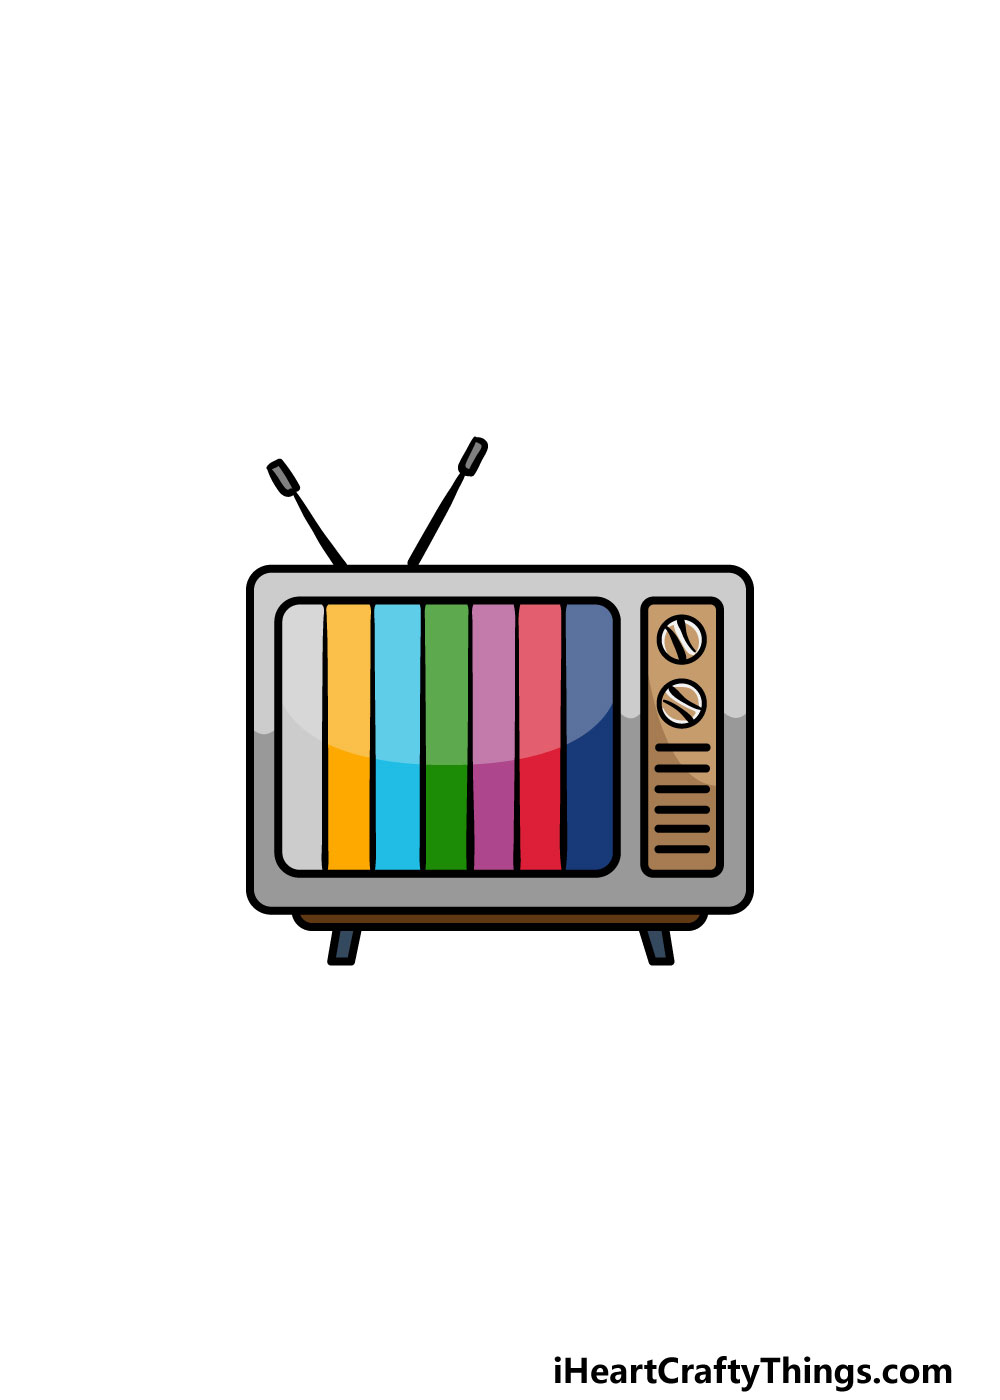 TV Drawing - How To Draw A TV Step By Step